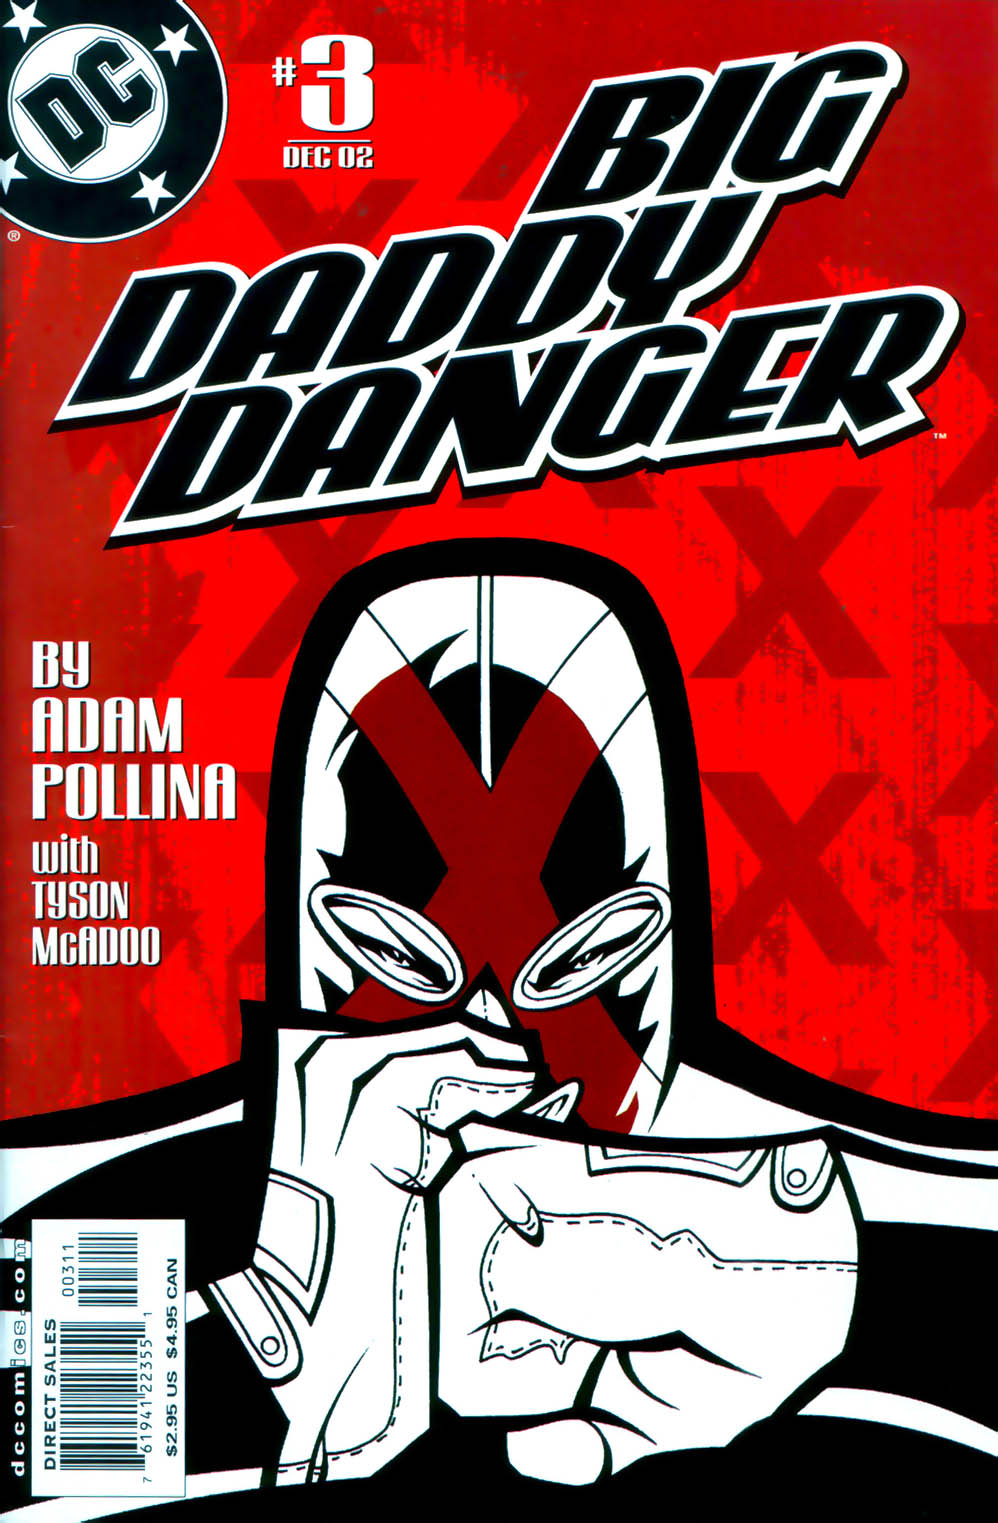 Read online Big Daddy Danger comic -  Issue #3 - 3